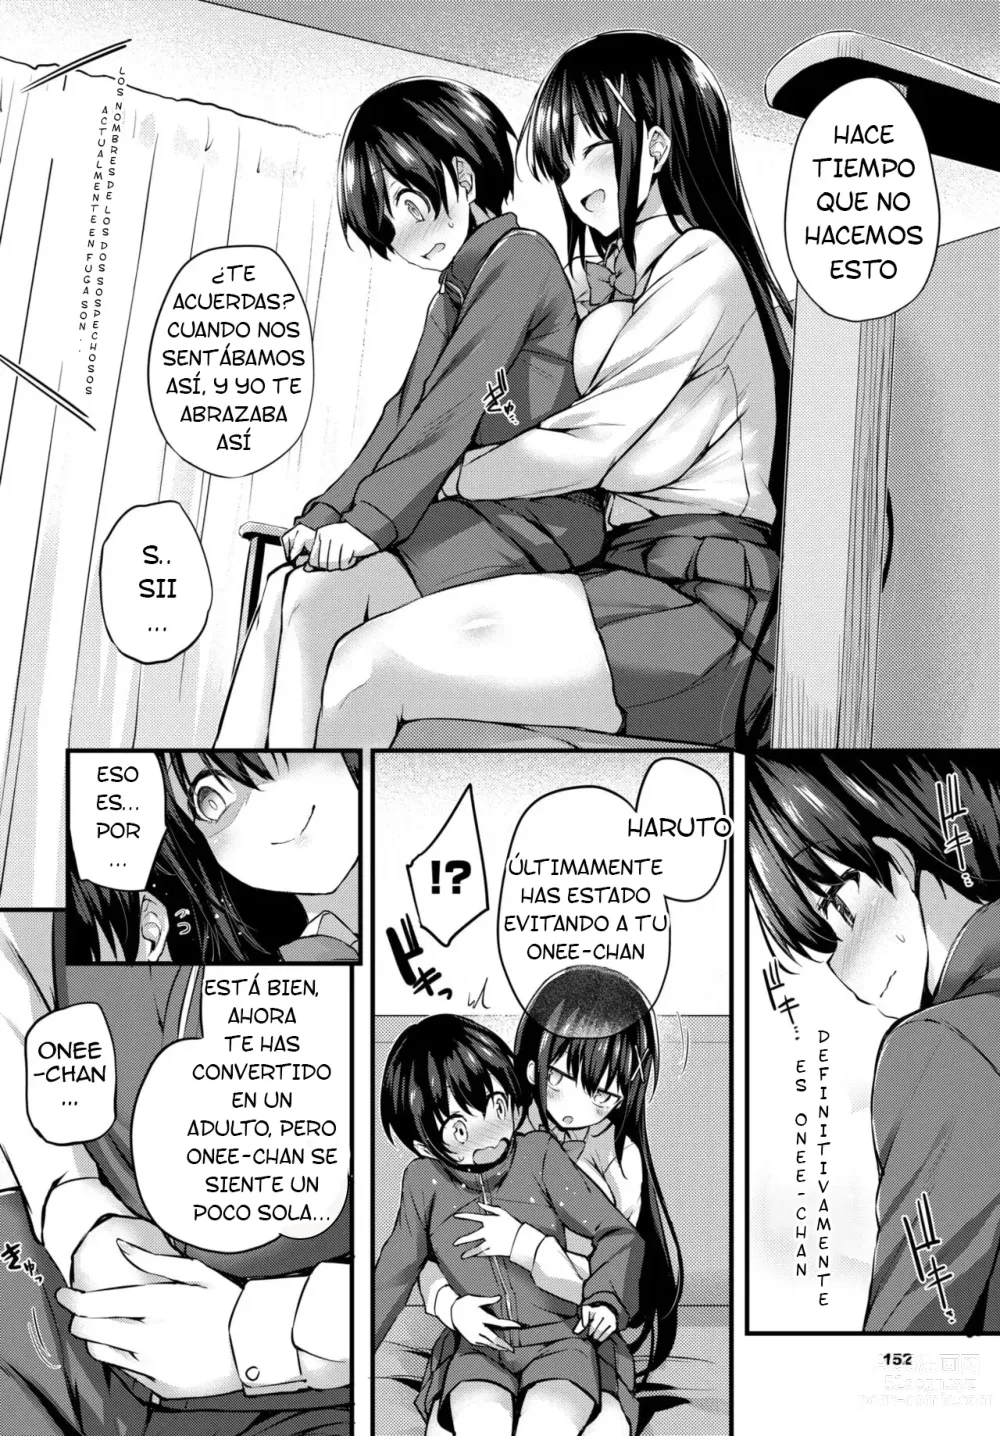 Page 18 of manga Boku no Onee-chan - My beloved was defiled and taken from me...